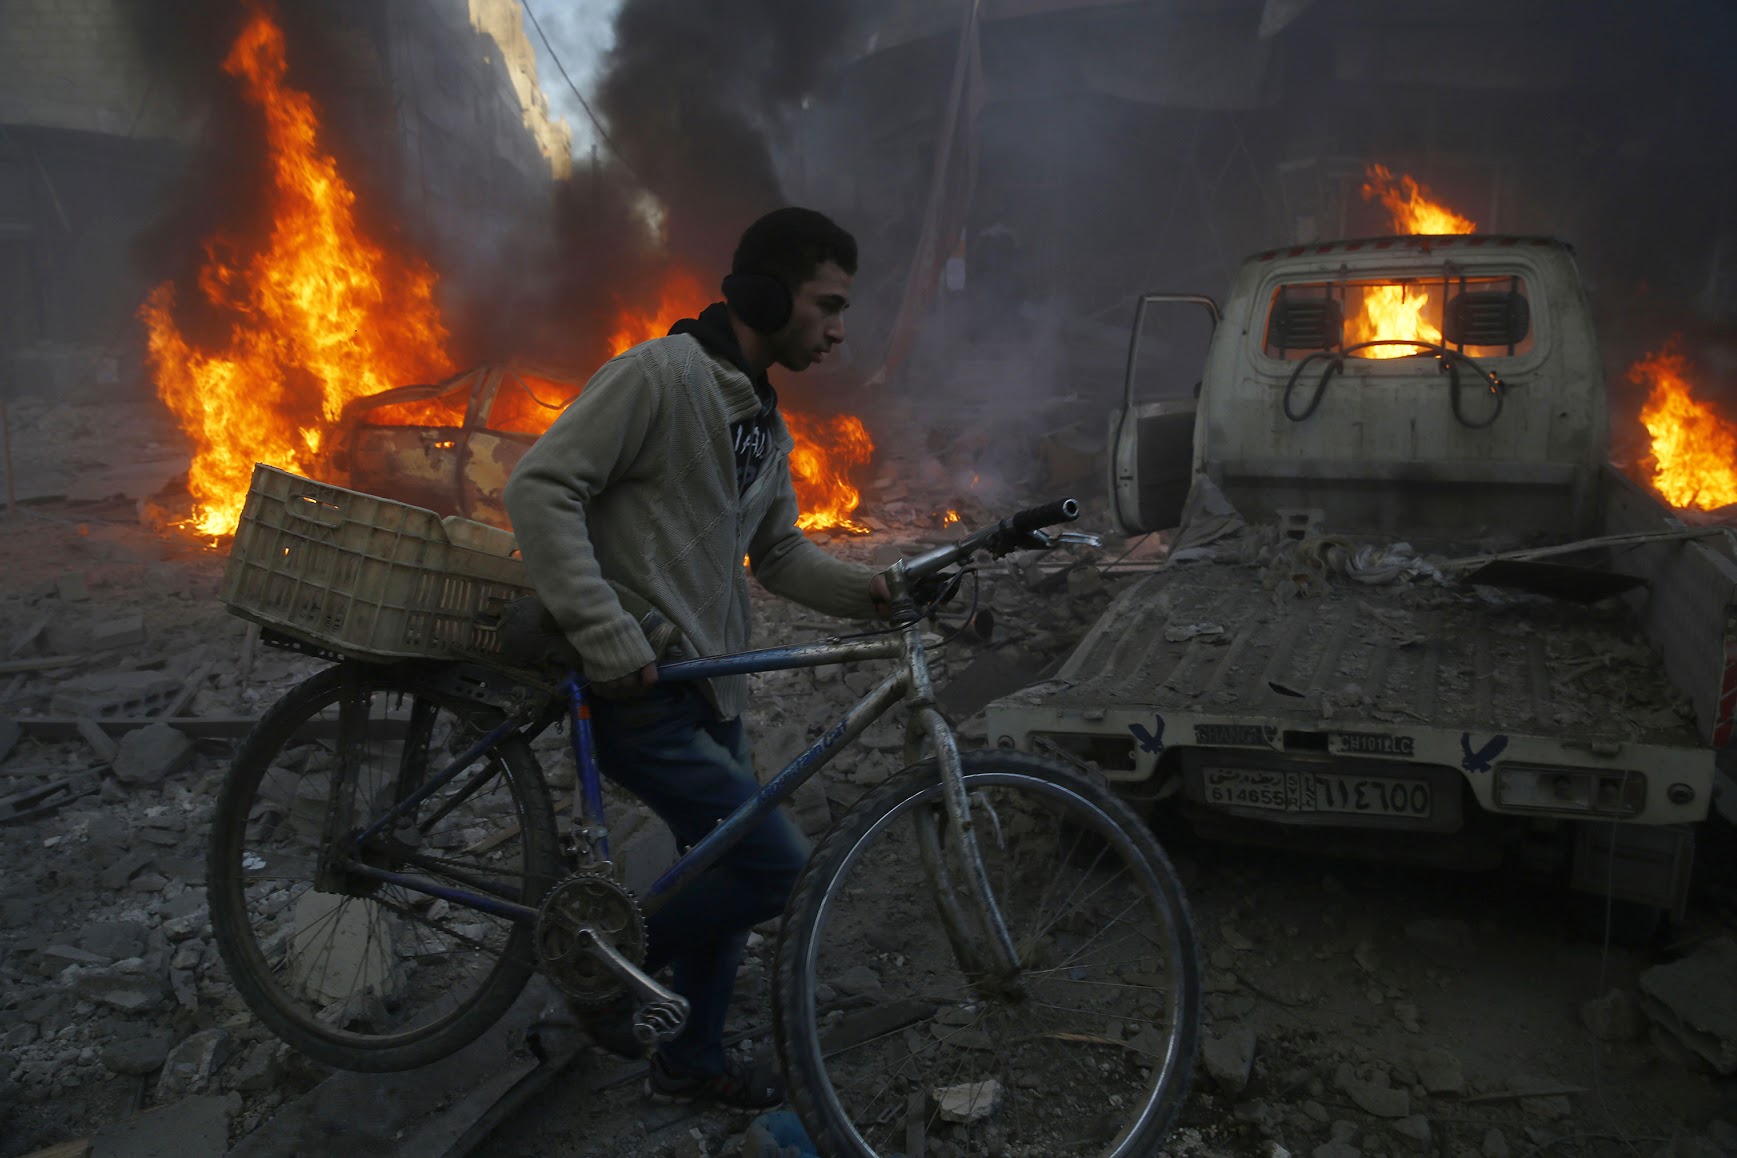 A man carries his bicycle past debris and burning cars following reported airstrikes in the town of Hamouria in the eastern Ghouta region, a rebel stronghold east of the Syrian capital Damascus, on December 9, 2015. The Syrian Observatory for Human Rights reported at least 11 civilians, including four children, were killed in strikes on the town of Hamouria, but said it was unclear if they were carried out by Russian or regime aircraft. AFP PHOTO / SAMEER AL-DOUMY